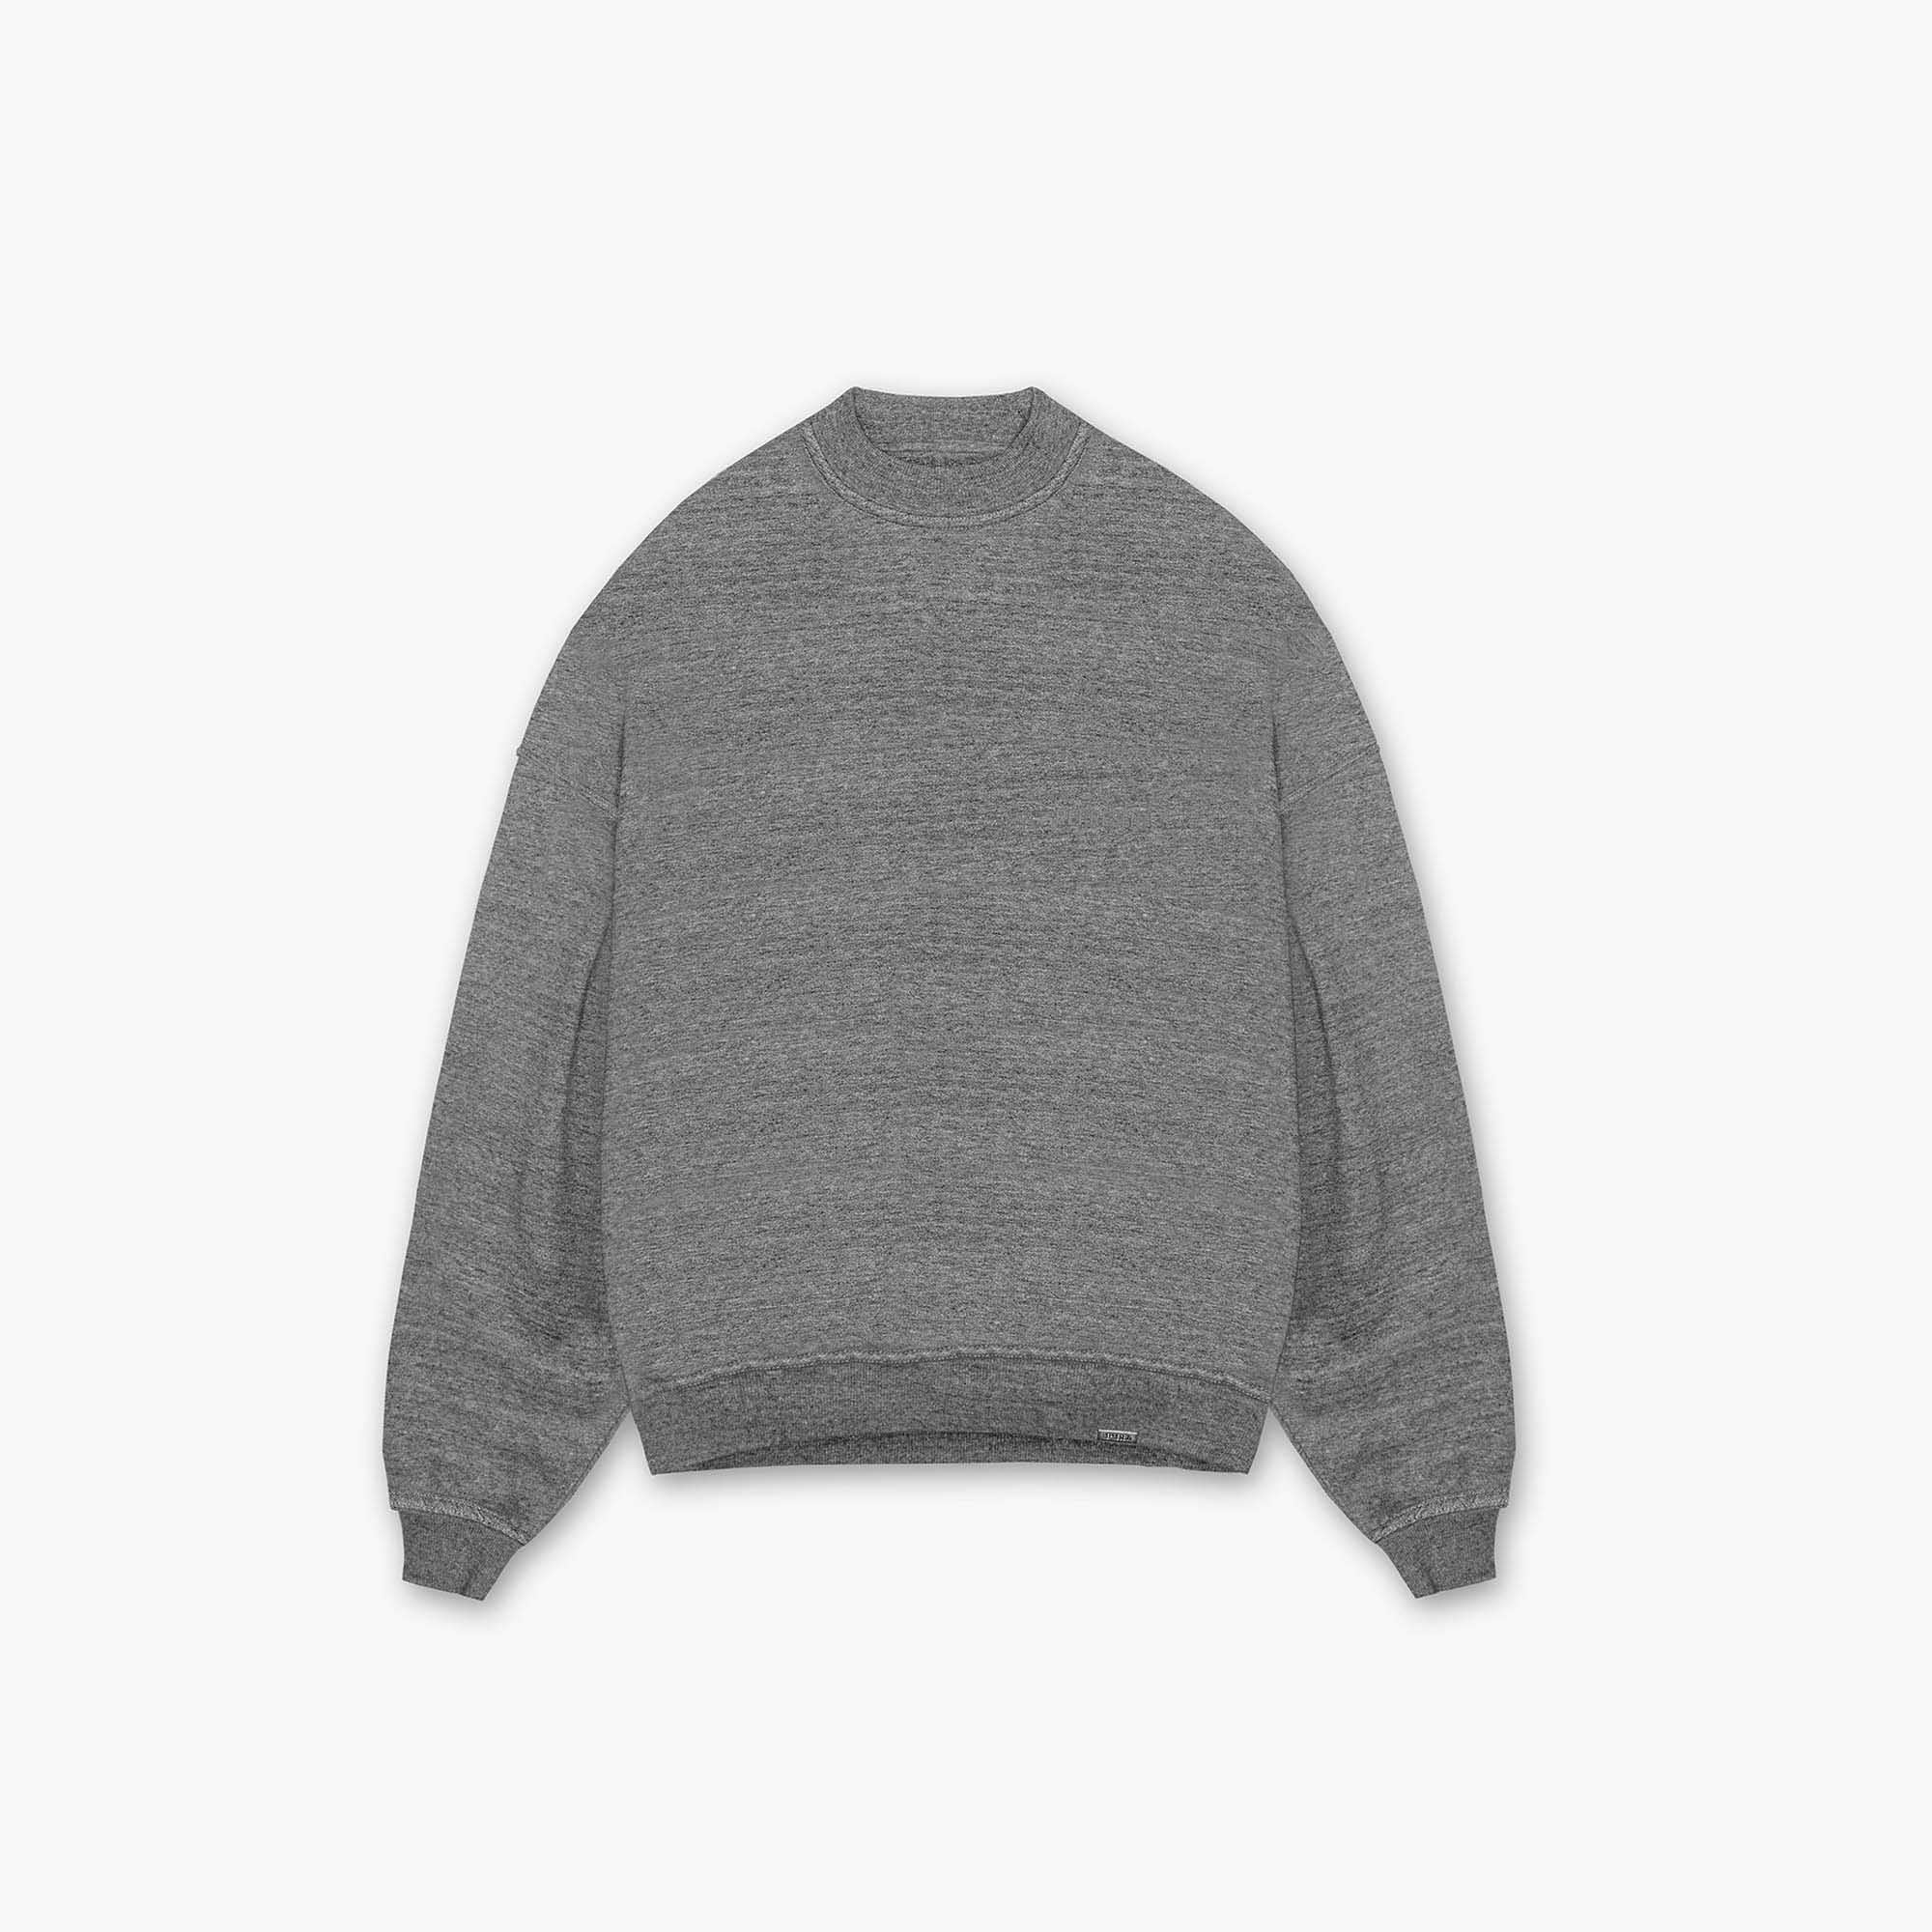 Best Selling Shopify Products on representclo.com-5